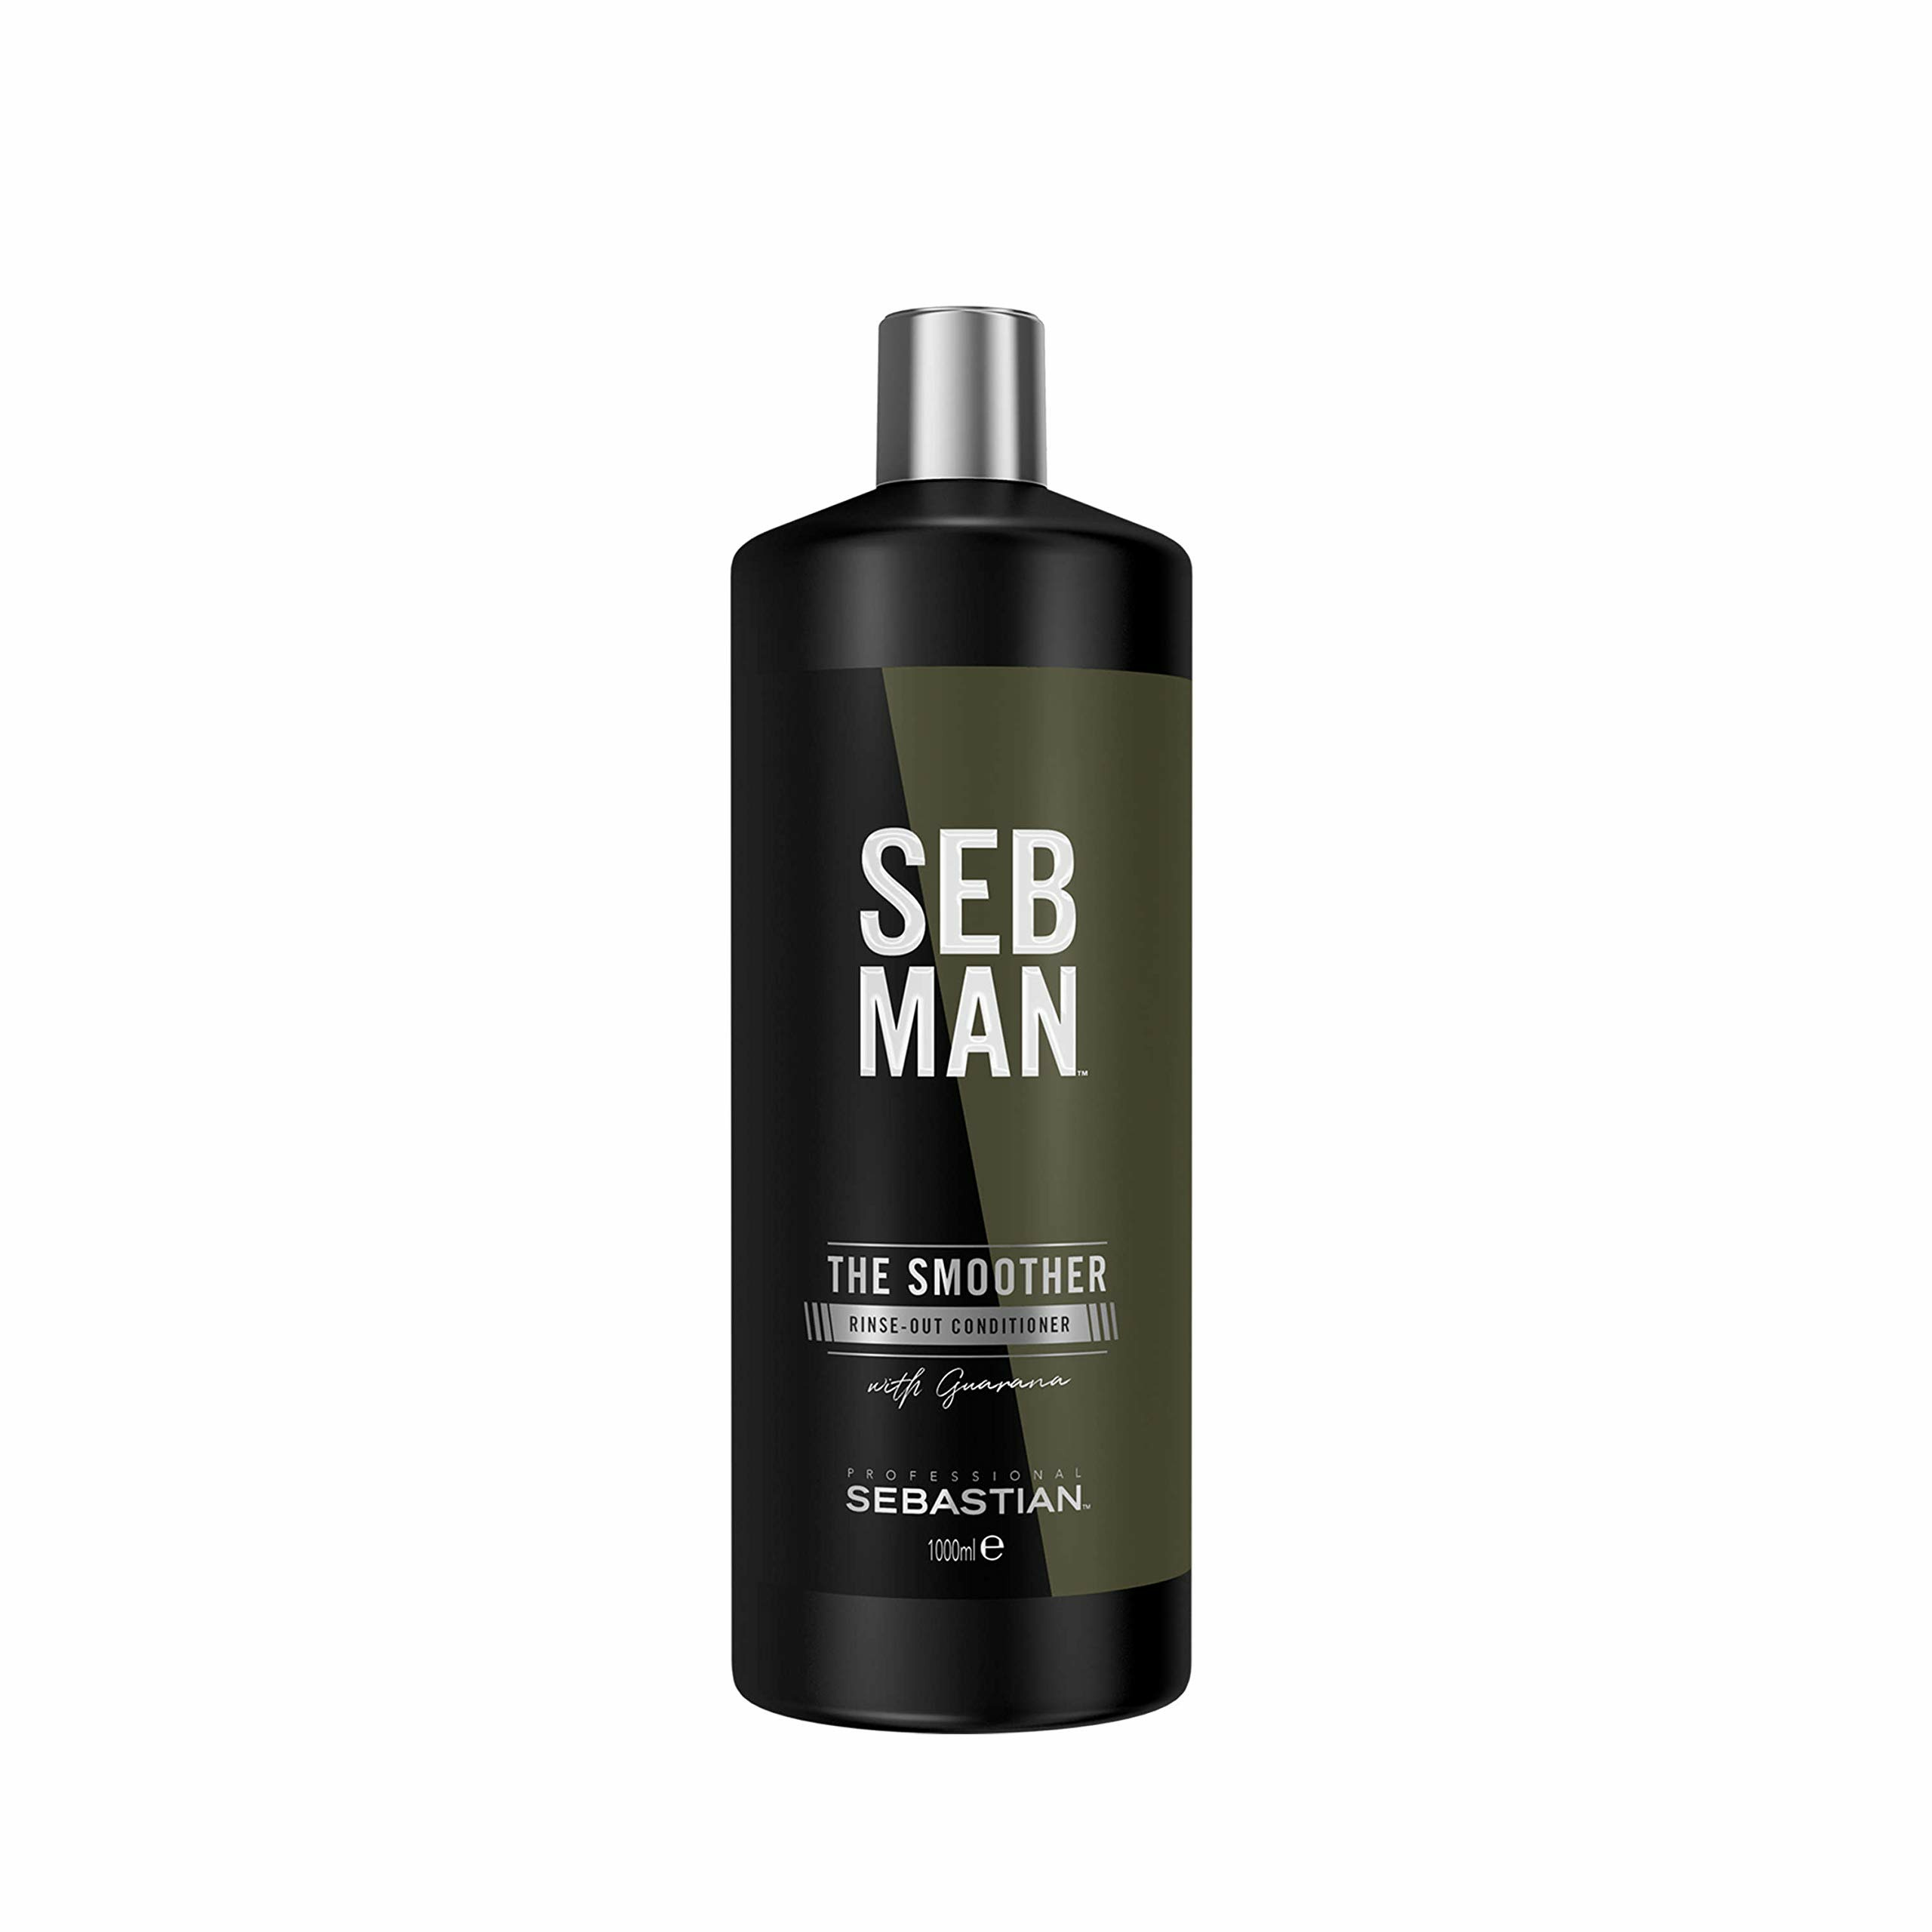 SEB MAN The Smoother Conditioner 1L